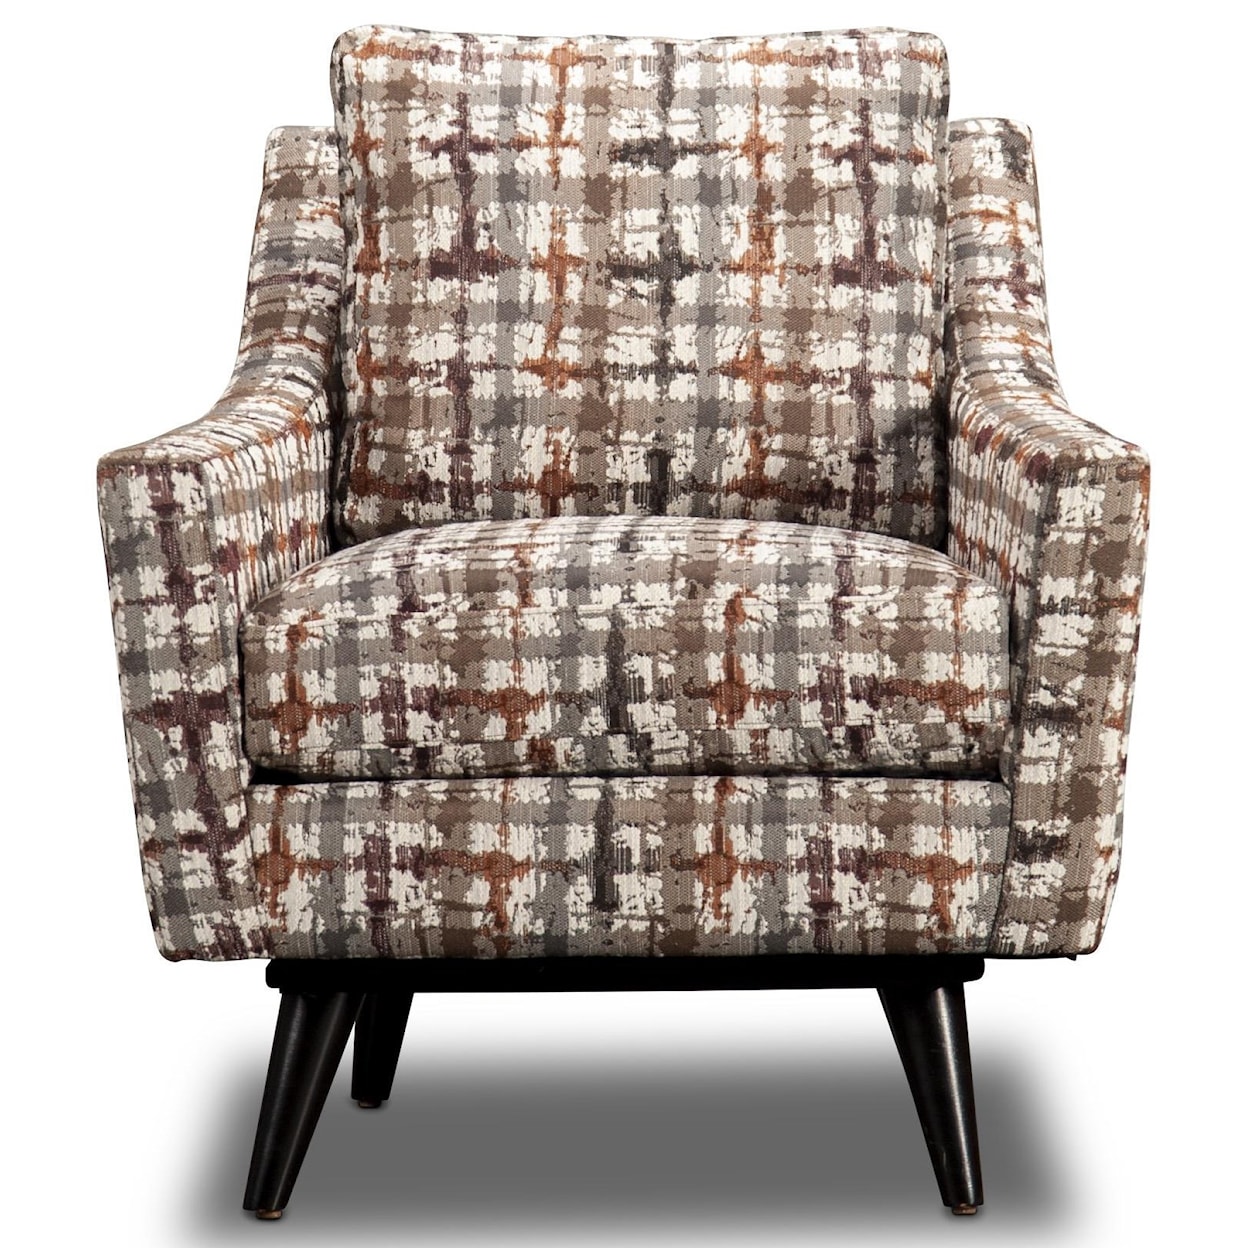 Jonathan Louis Calabrese Calabrese Swivel Chair